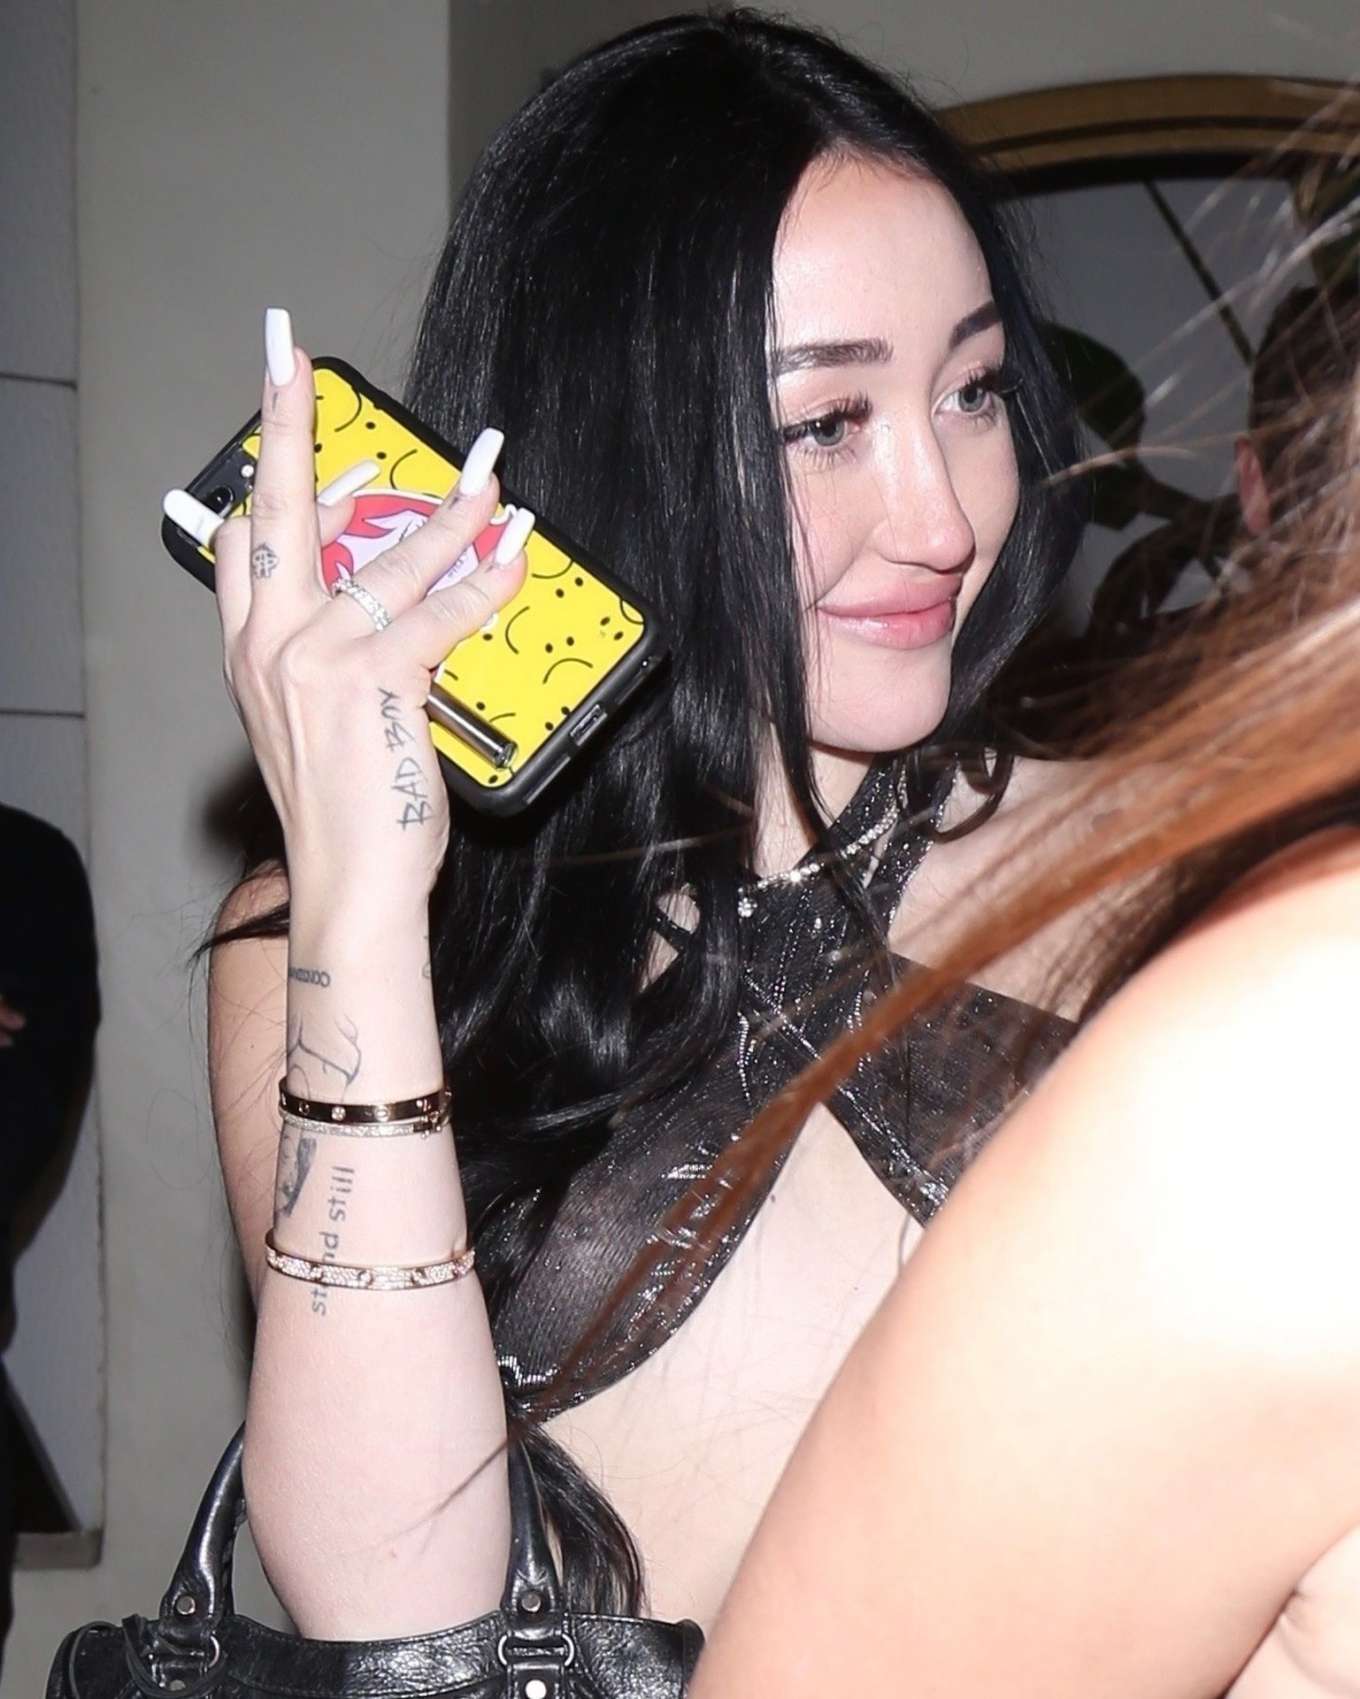 Noah Cyrus Flashes Her Assets From Beneath A Scarf Top In La